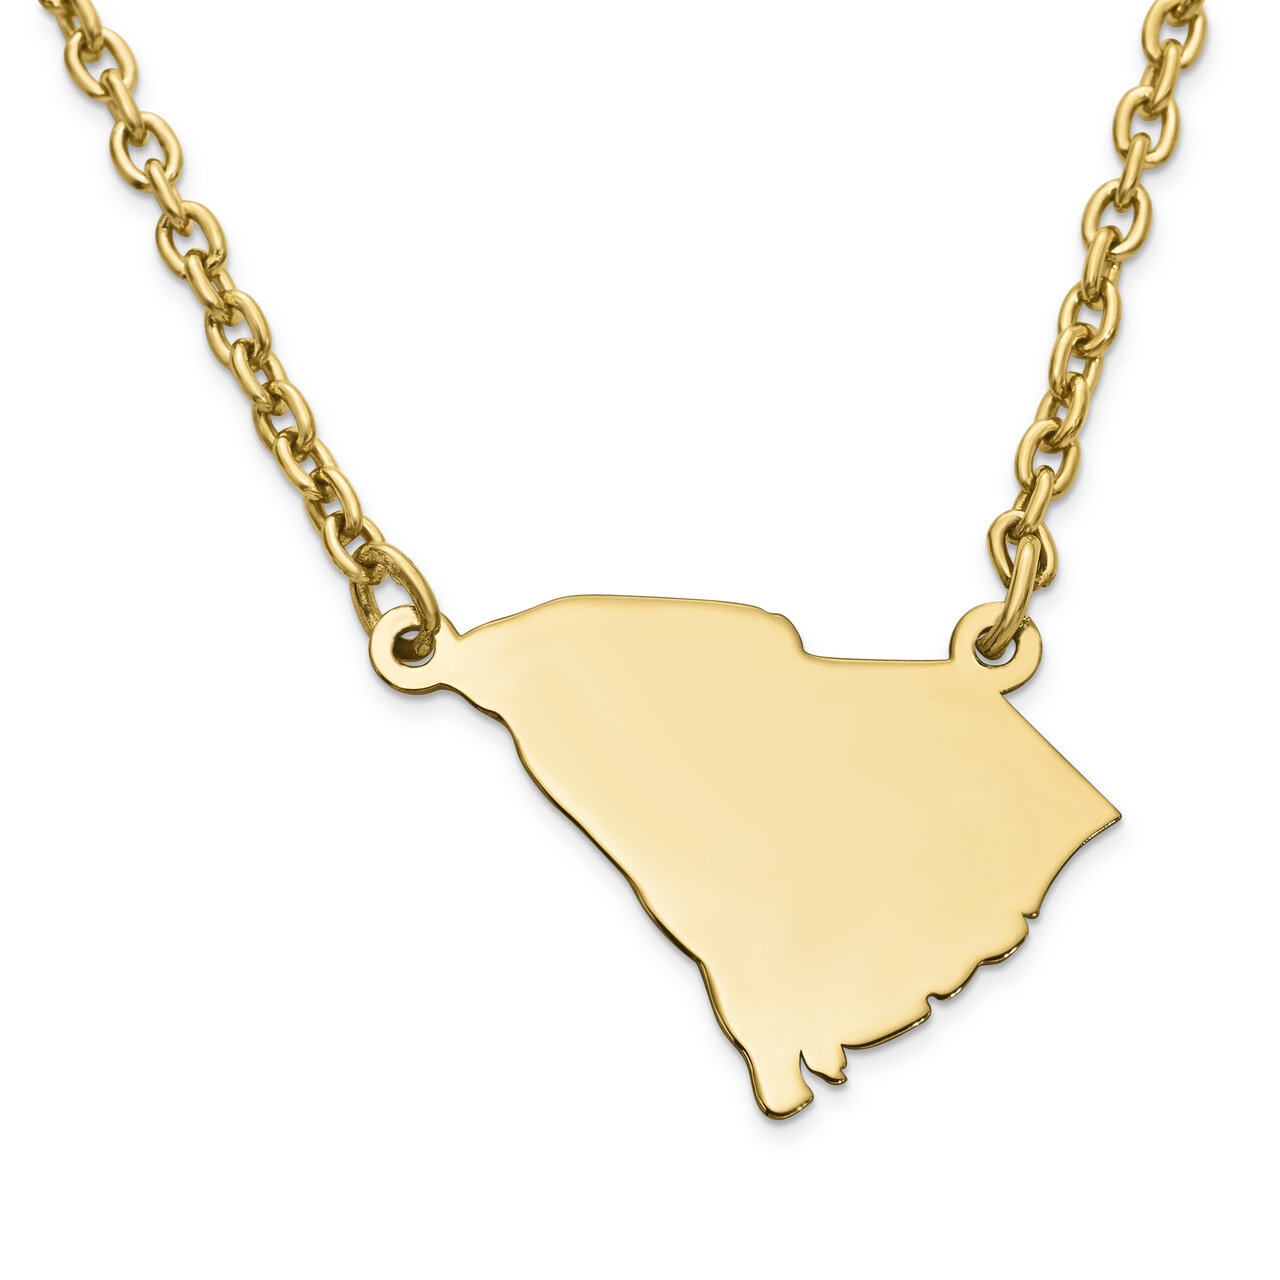 South Carolina State Pendant Necklace with Chain 14k Yellow Gold Engravable XNA706Y-SC